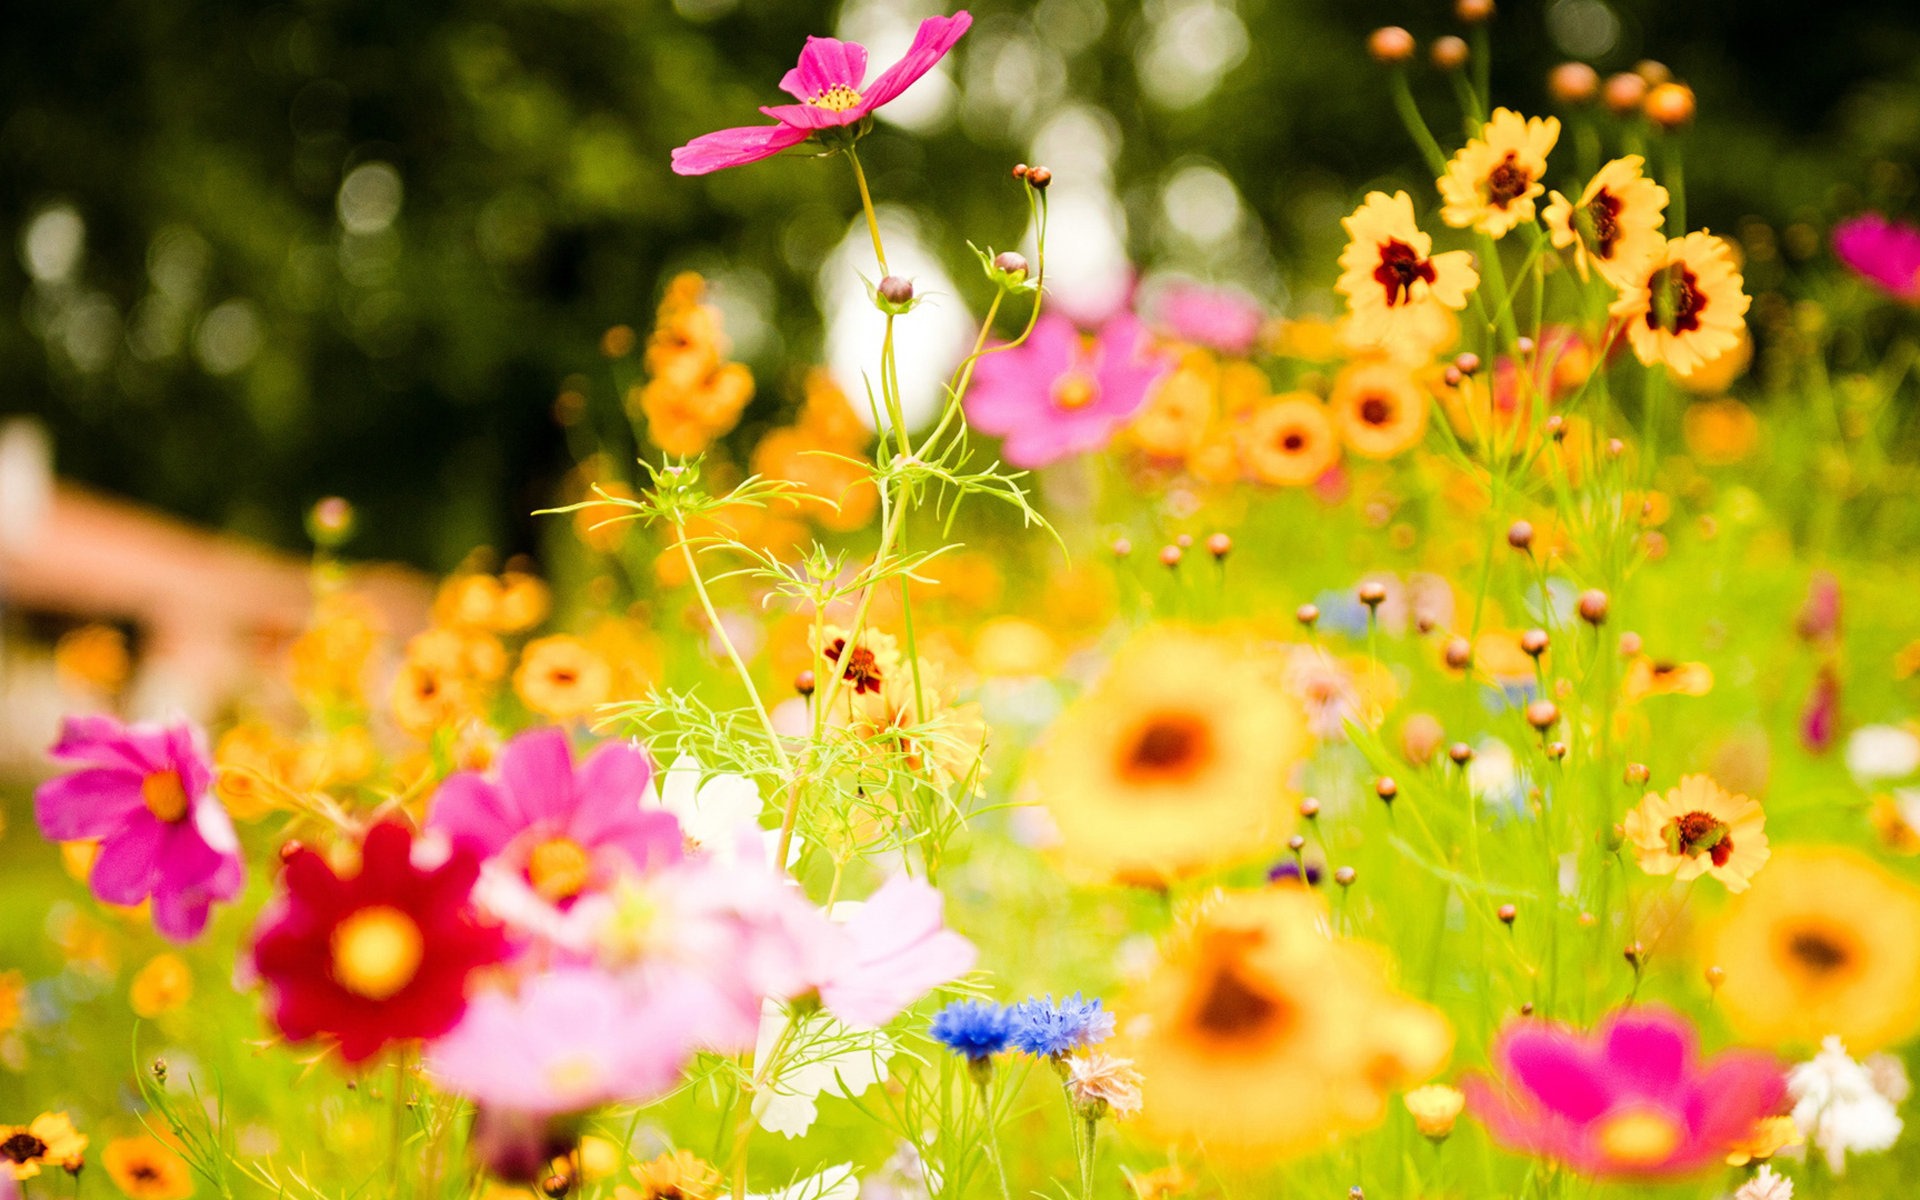 Fresh flowers and plants spring theme wallpapers #6 - 1920x1200